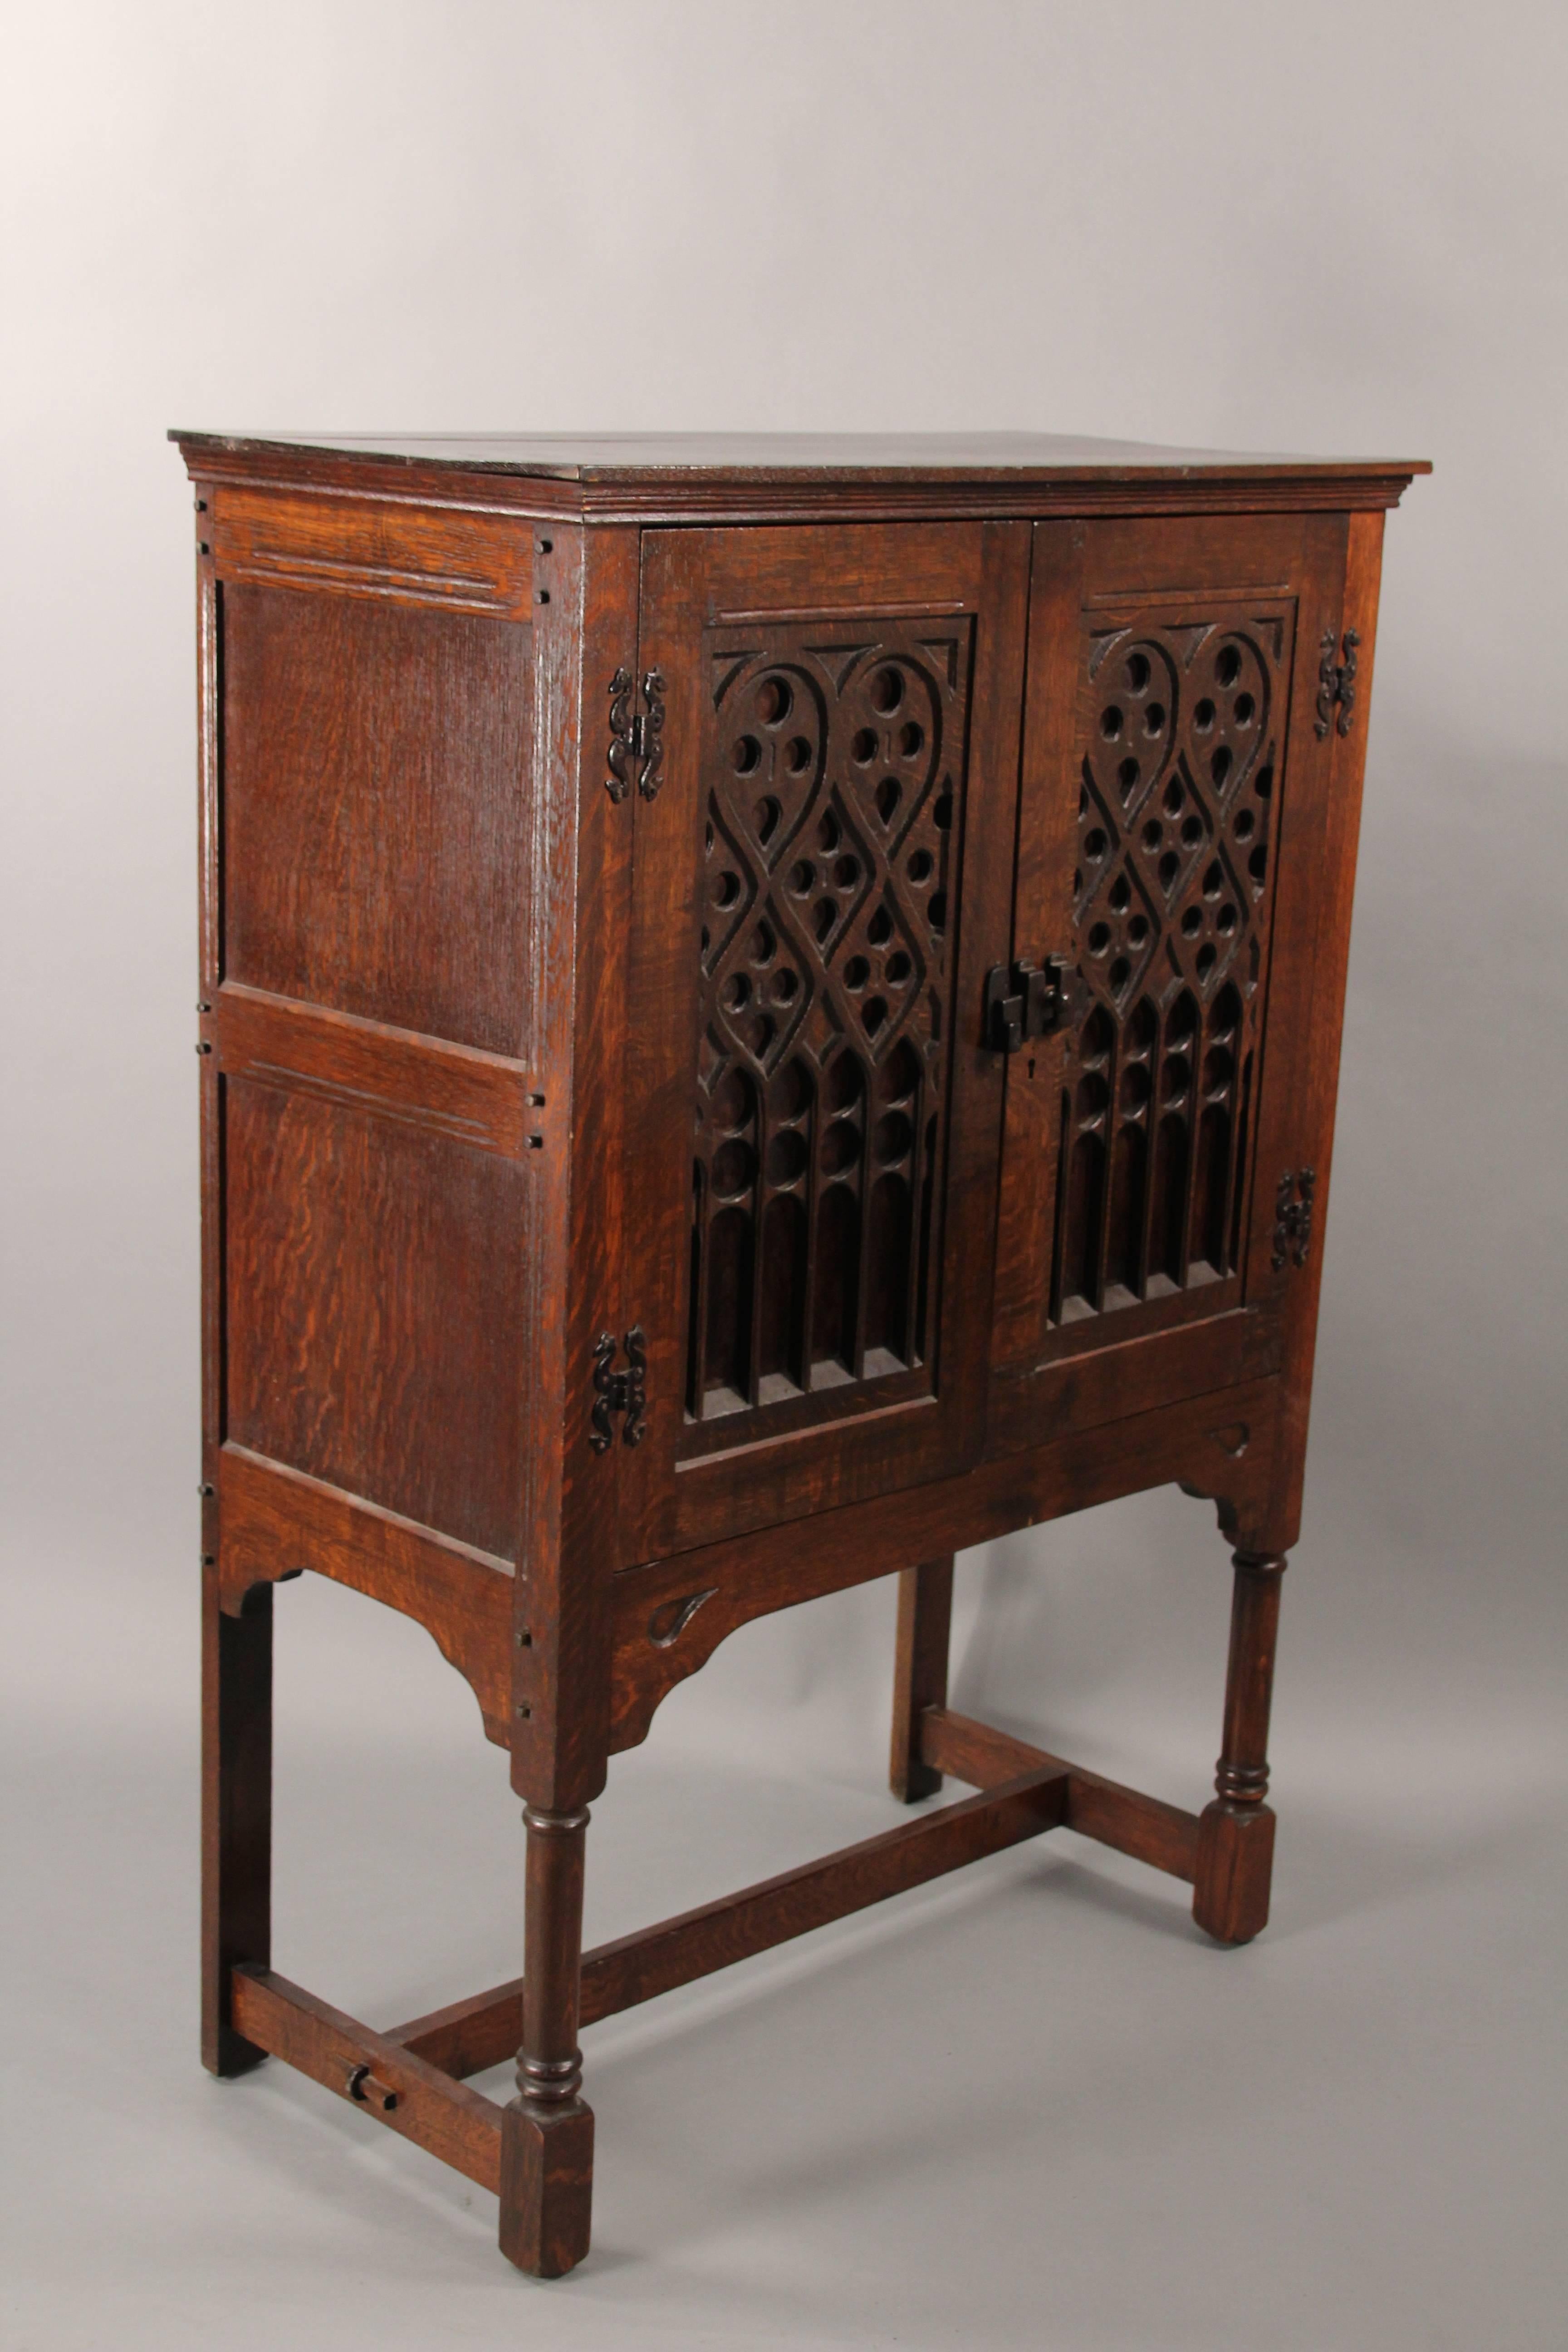 Spanish Colonial Turn of the Century Spanish Revival Cabinet with Carved Front with Iron Hardware